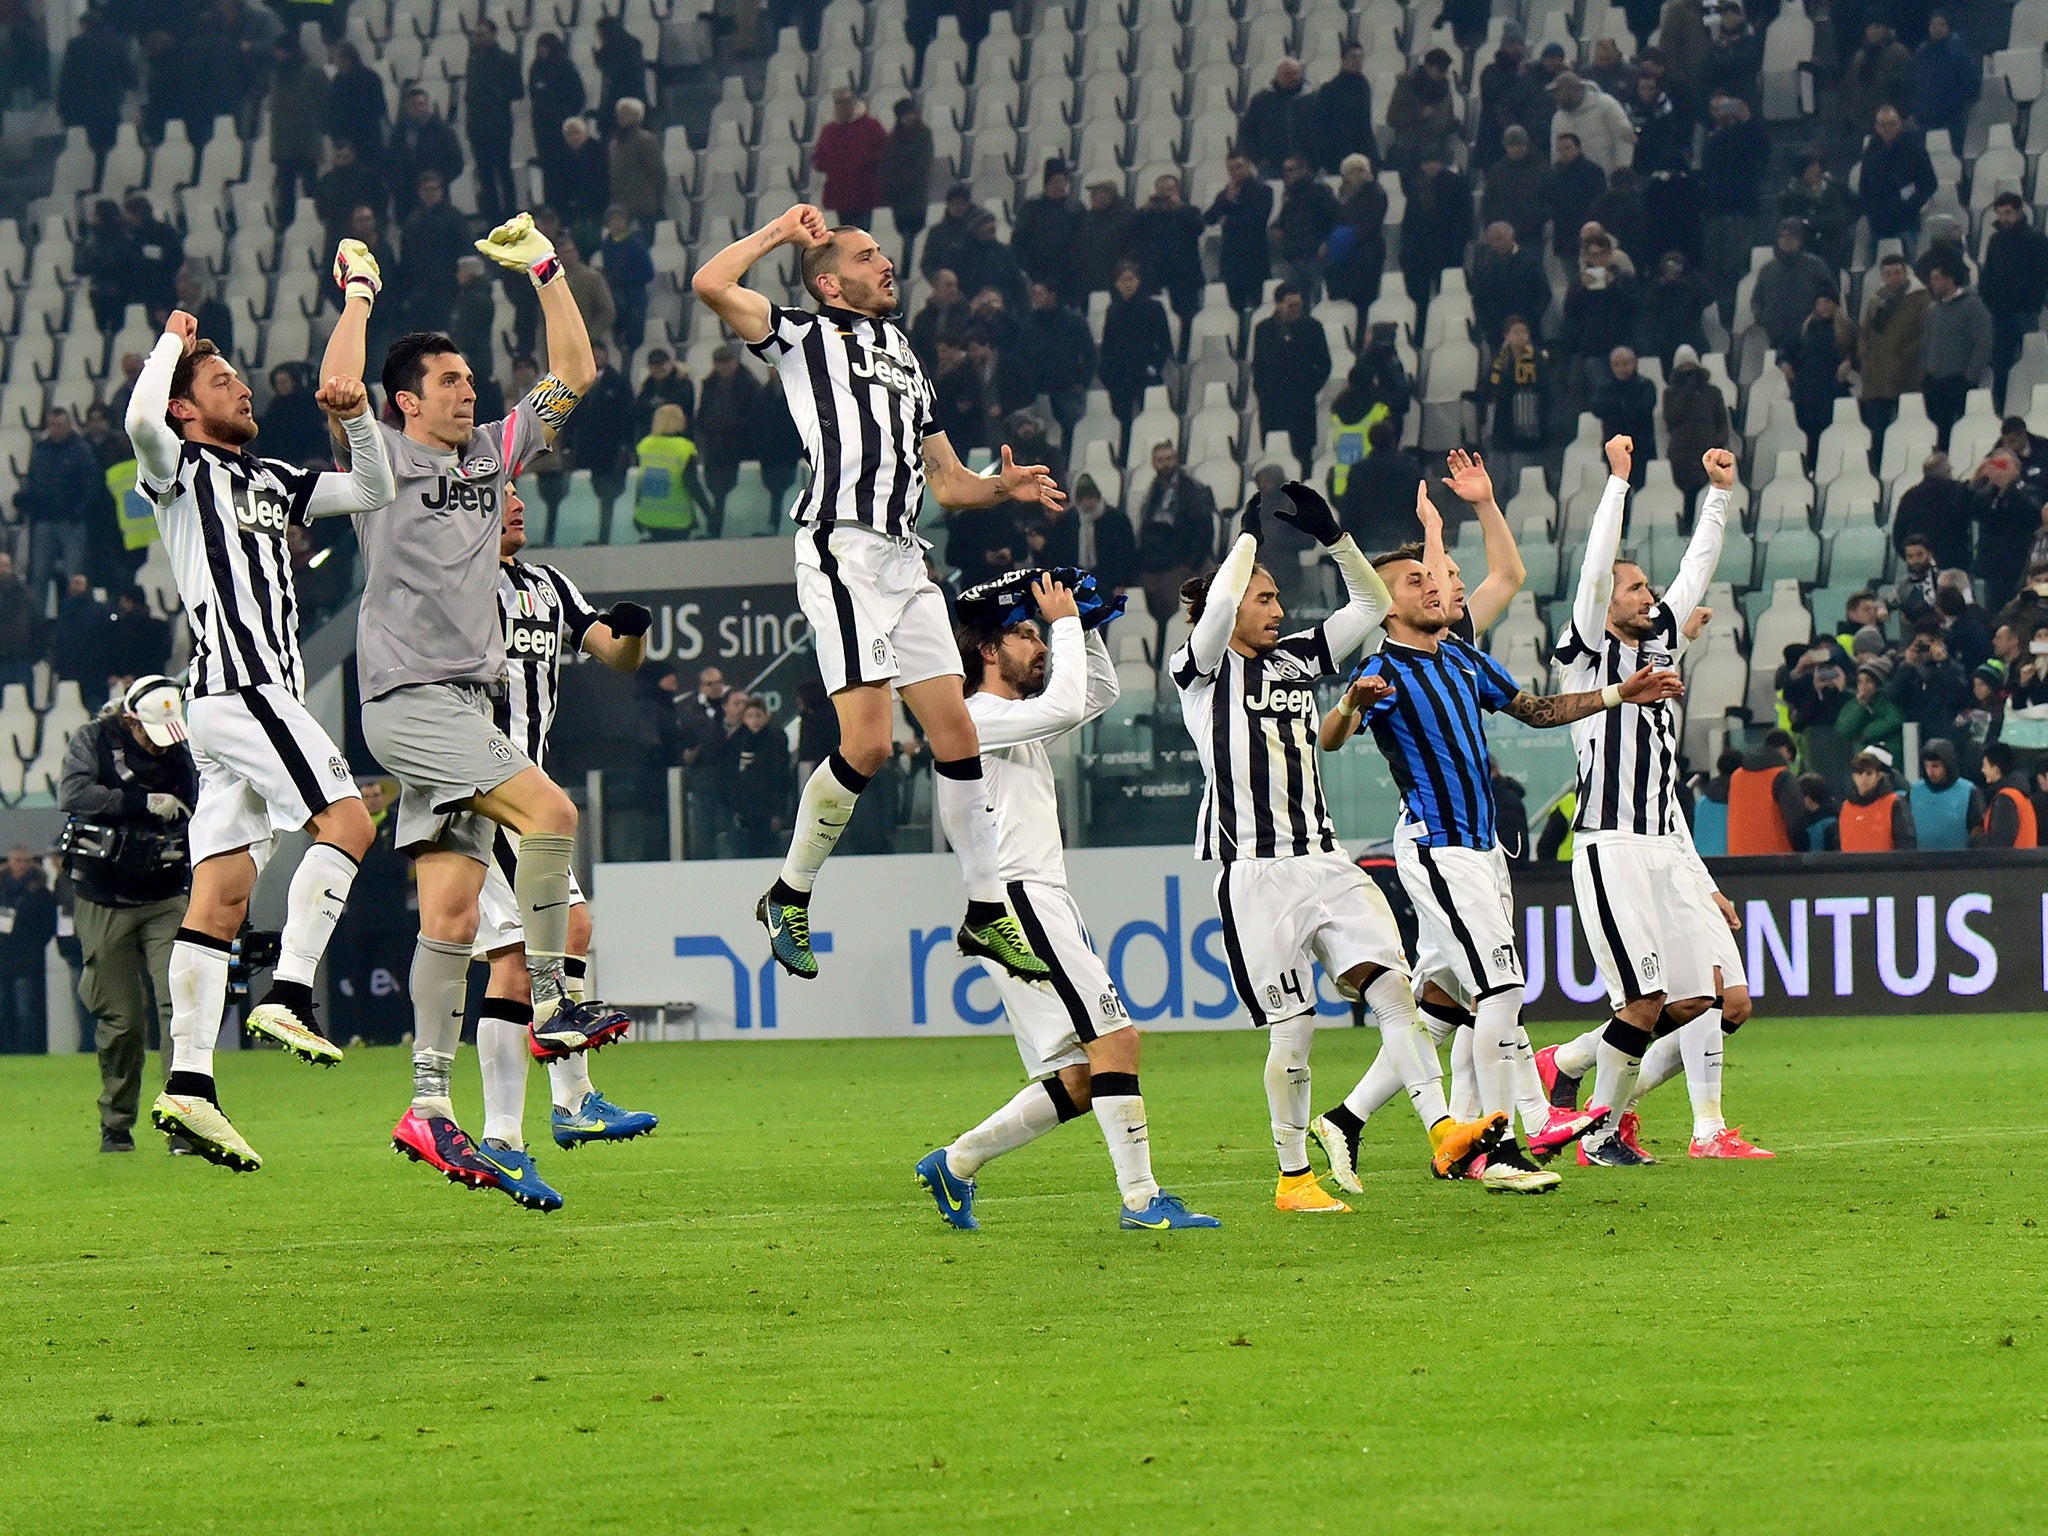 Juventus have dominated Serie A in recent seasons but are yet to transfer that form to Europe